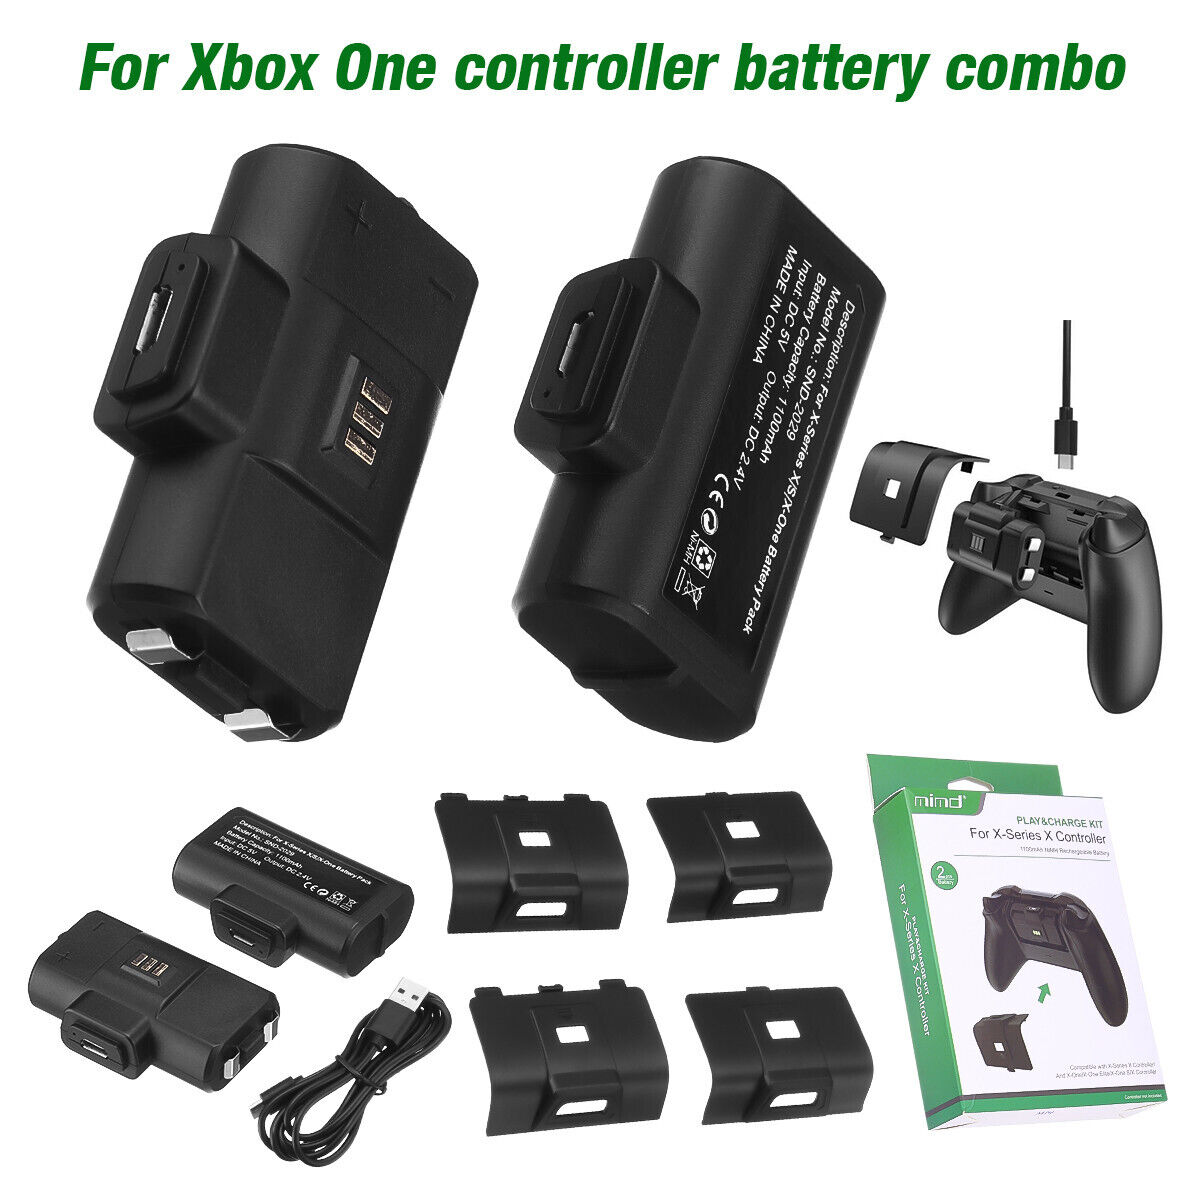 Rechargeable Battery Pack For XBox One X/S Series X/S Controller & Charger Cable EBL